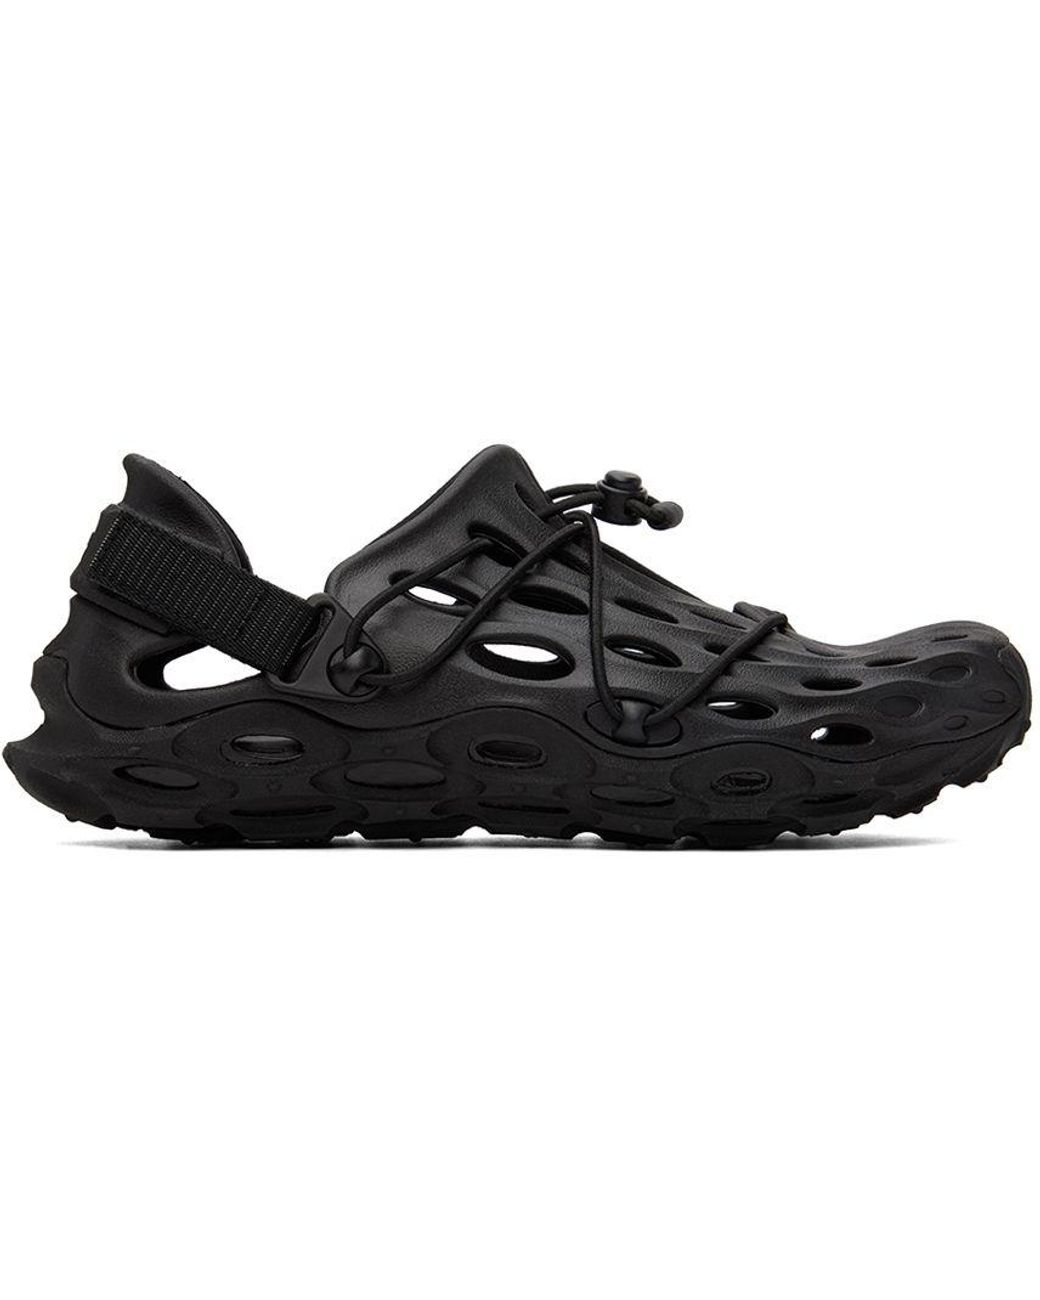 Merrell Black Hydro Moc At Cage Sandals for Men | Lyst